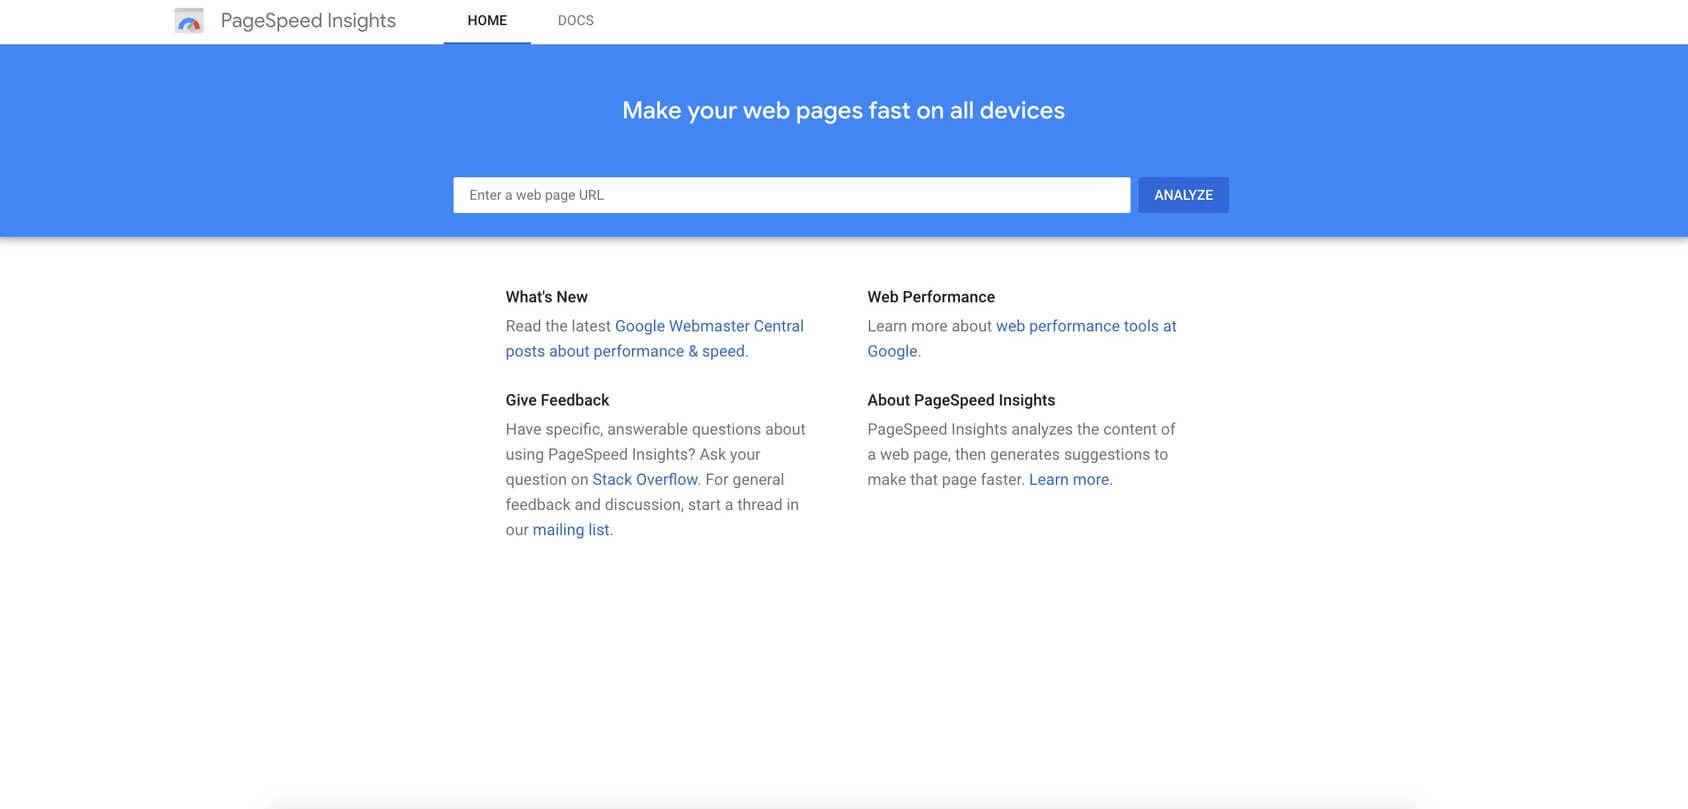 PageSpeed Insights homepage